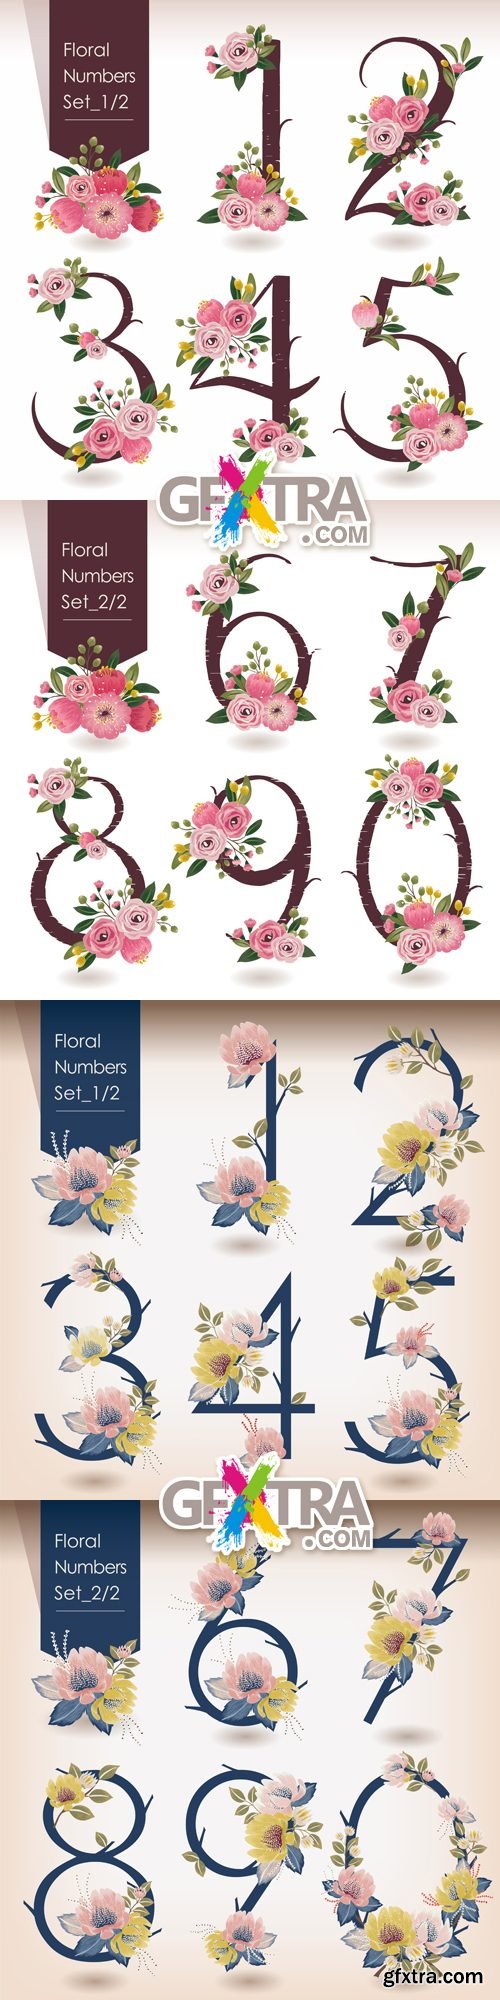 Floral Numbers Vector